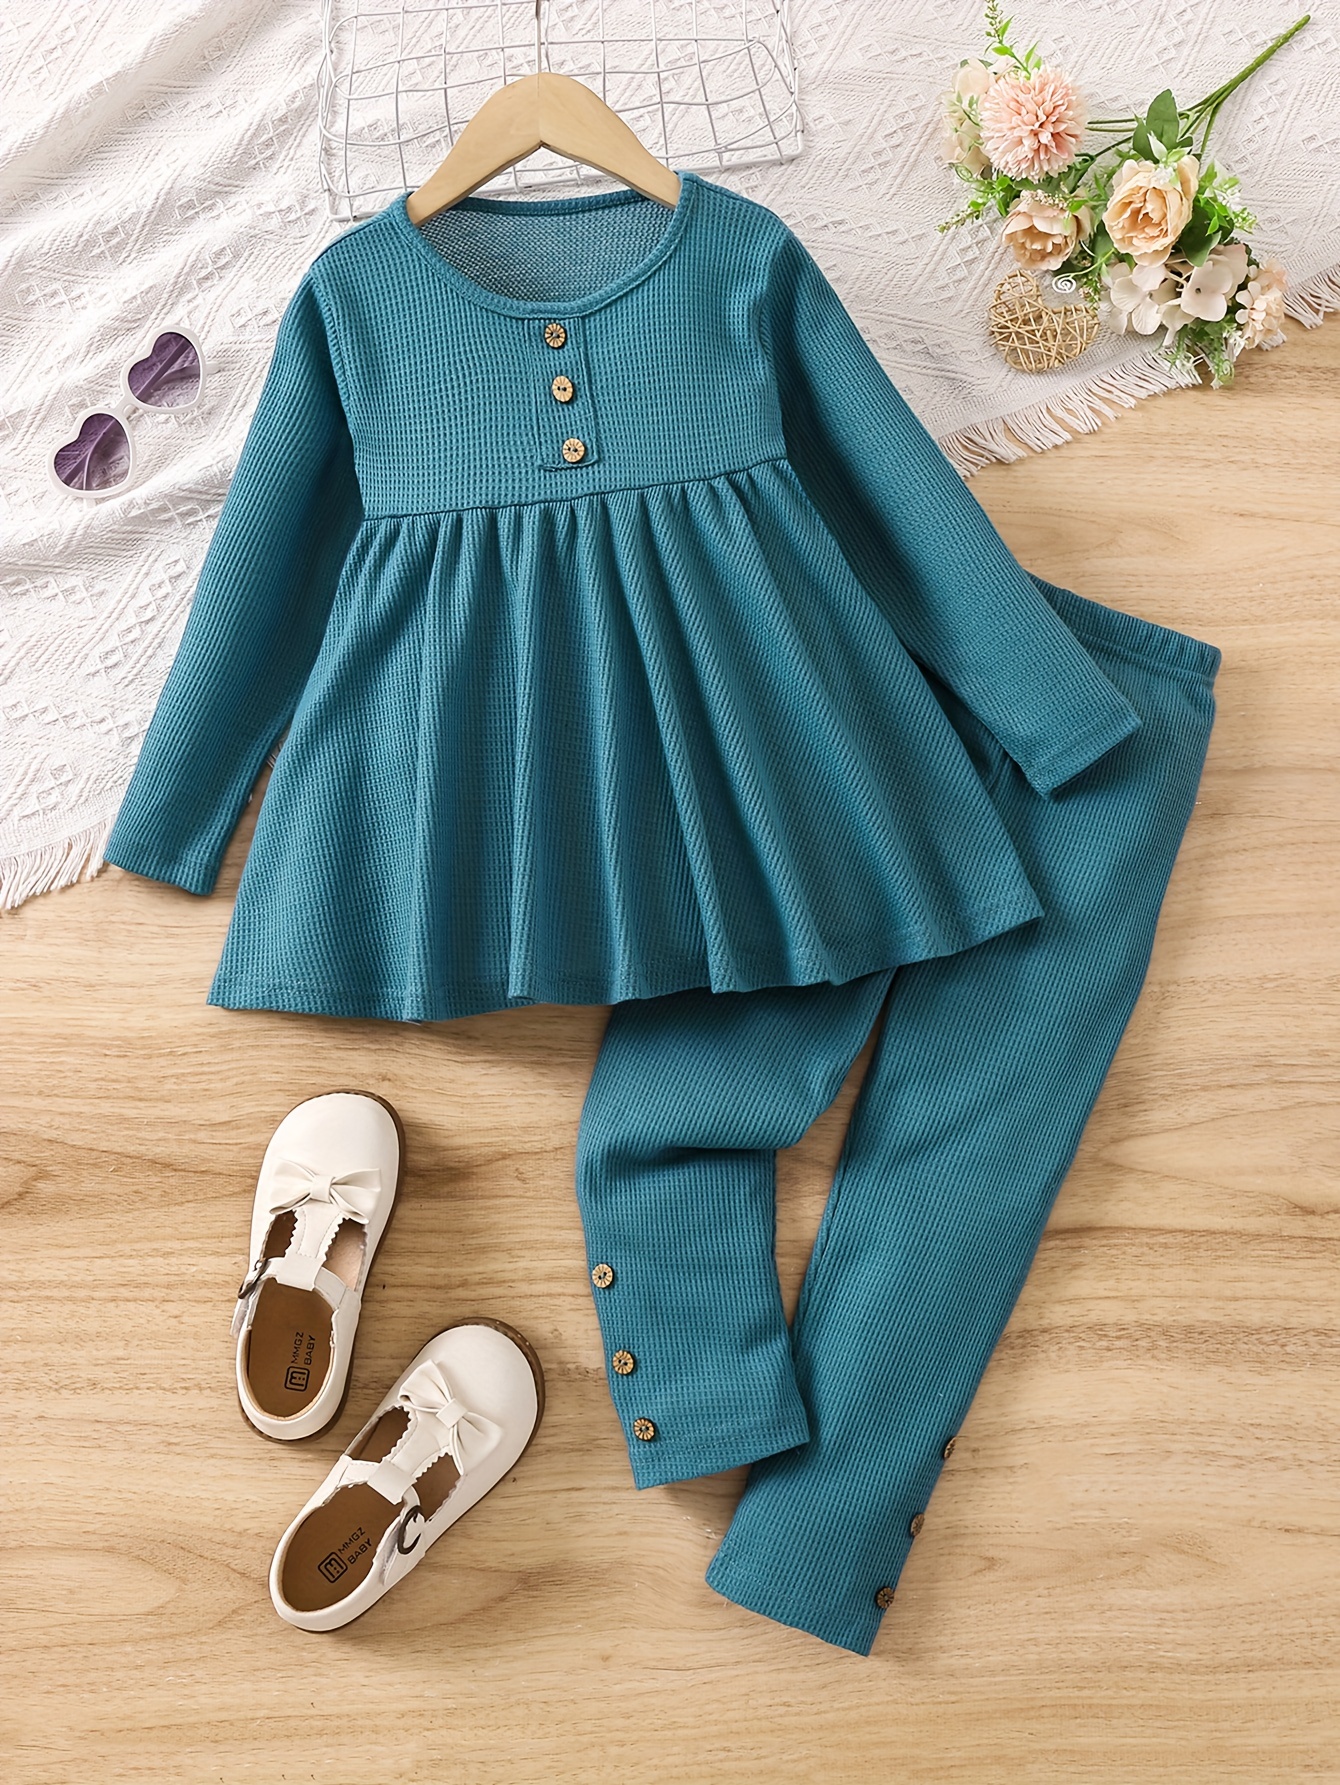 Girls Long-sleeved Belted Shirt + Flared Pants Set Kids Clothes Outfits